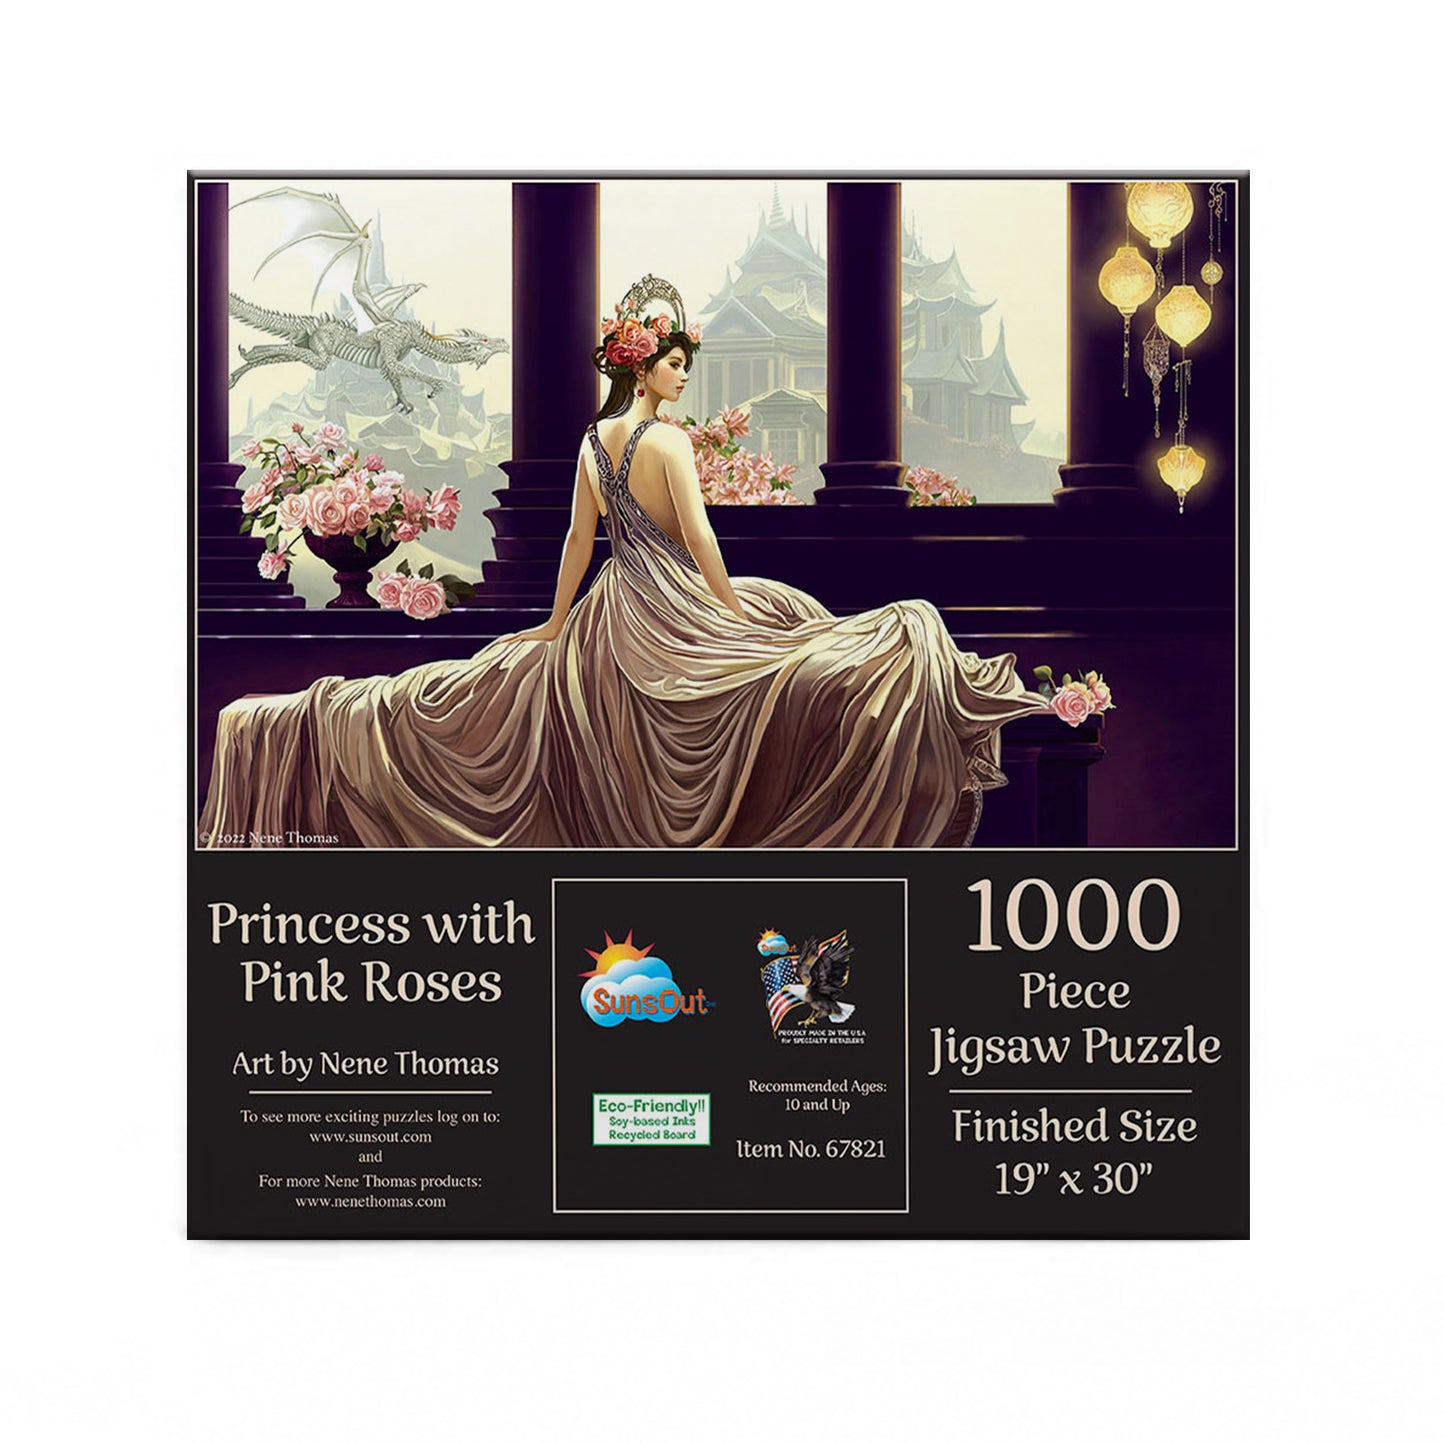 Princess with Pink Roses by Nene Thomas, 1000 Piece Puzzle